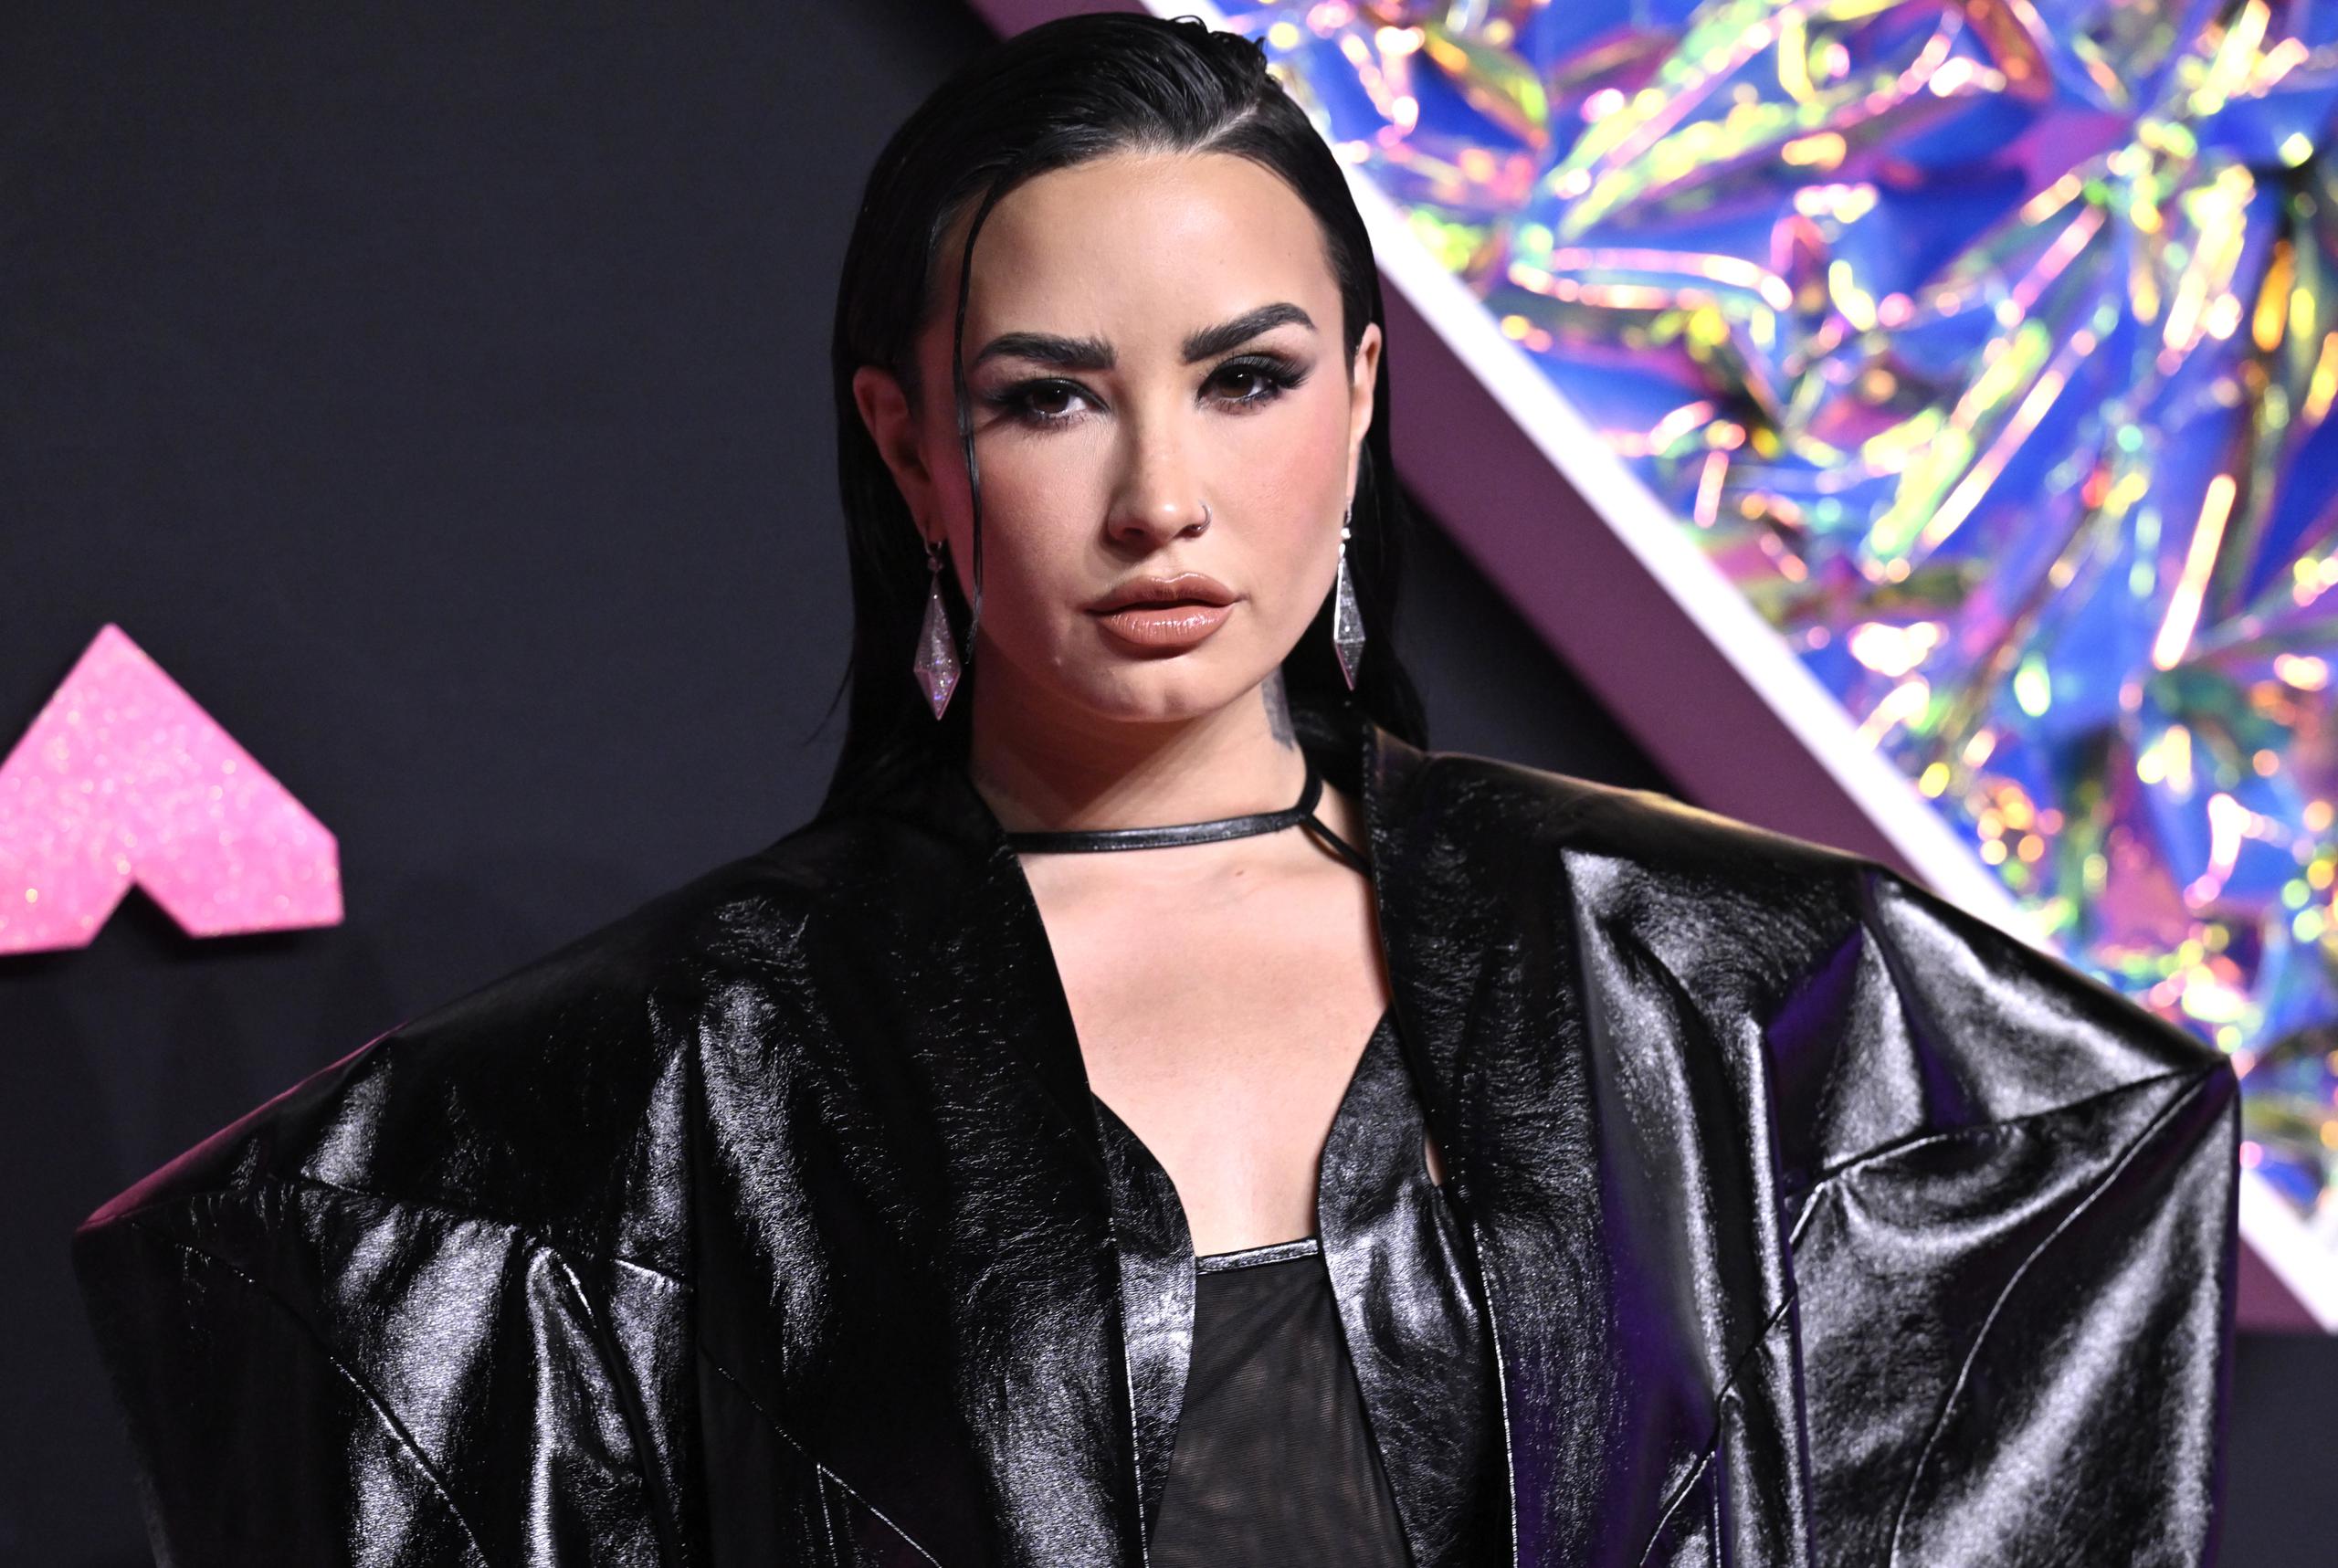 Demi Lovato arrives at the MTV Video Music Awards on Tuesday, Sept. 12, 2023, at the Prudential Center in Newark, N.J. (Photo by Evan Agostini/Invision/AP)